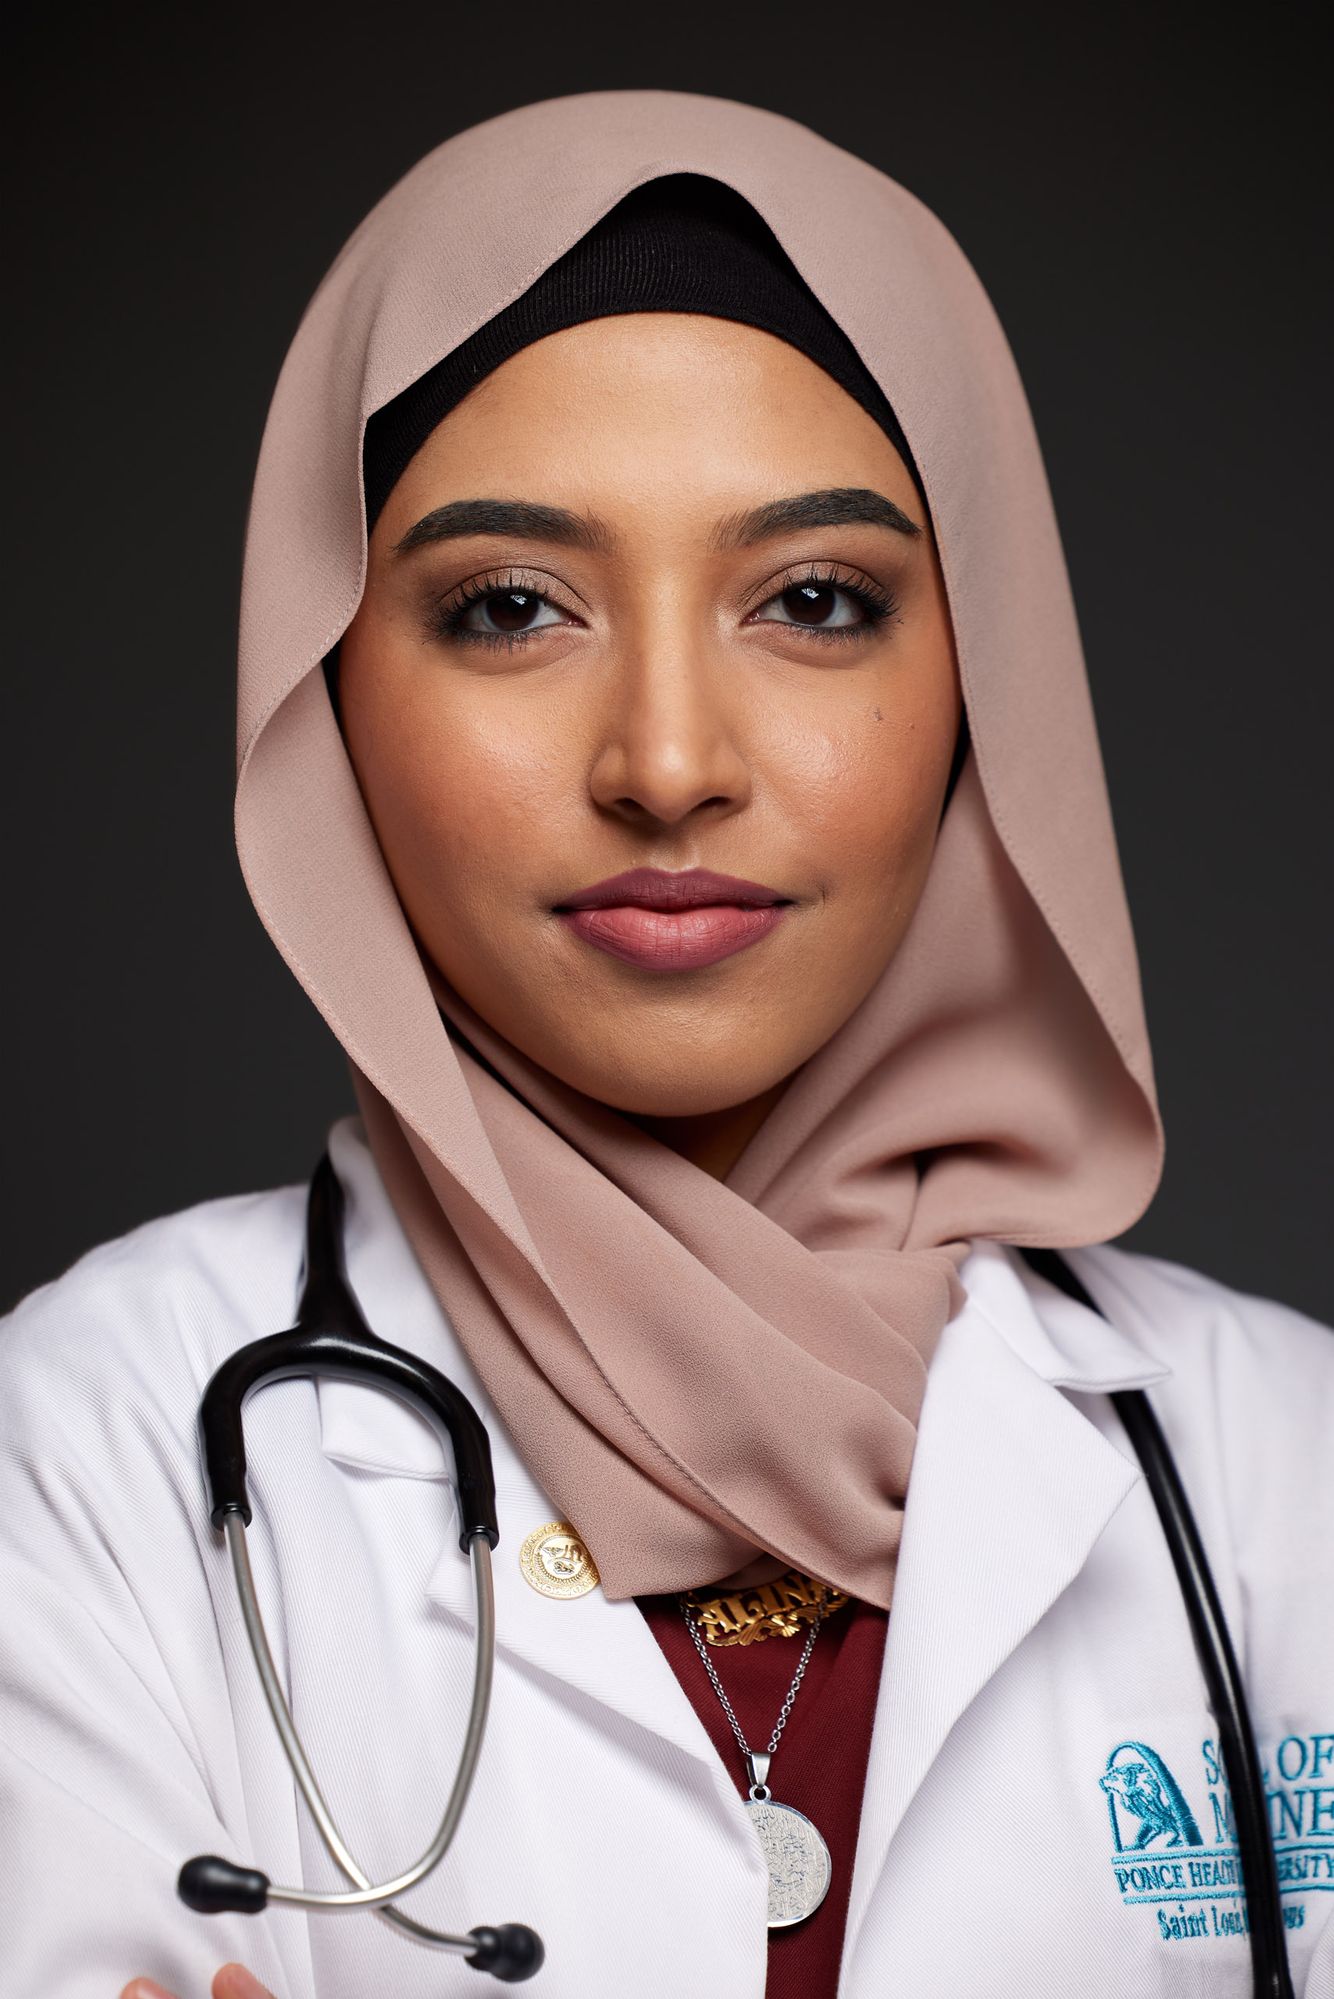 AMA Doctor Portrait Photograph by Chicago healthcare advertising photographer Jeff Schear